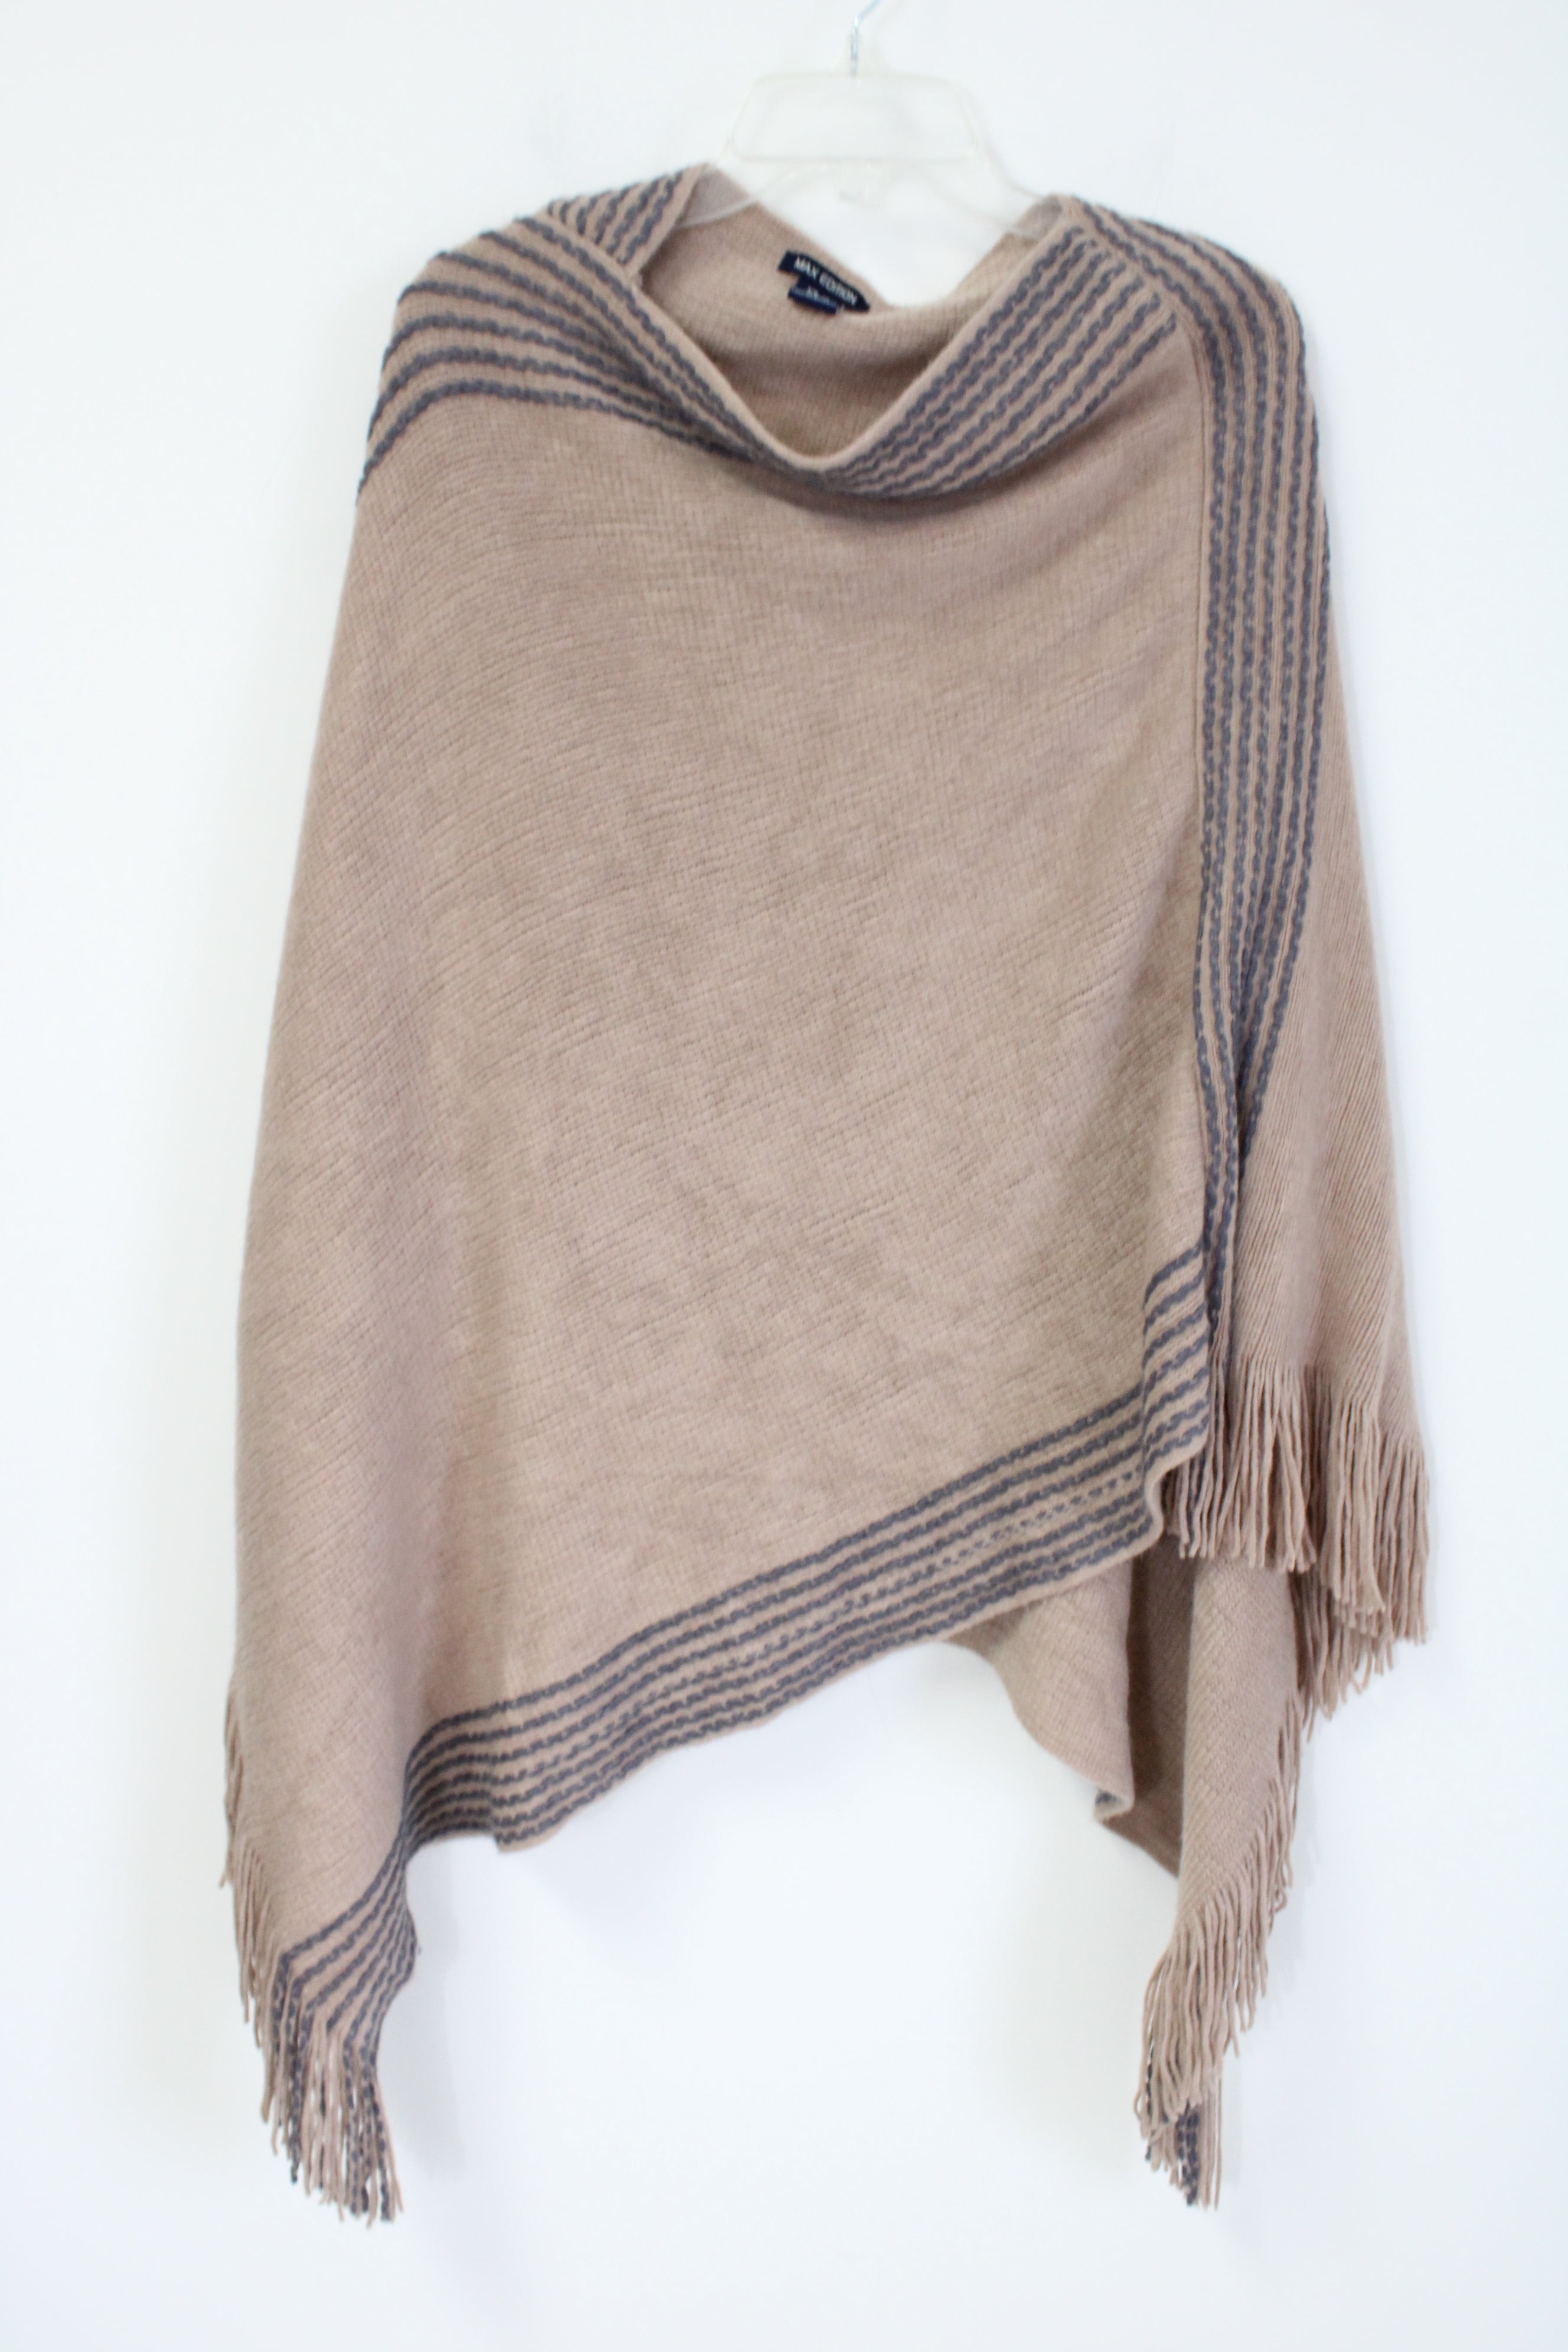 Max Edition Tan & Gray Knit Poncho Sweater | XS/S – Jubilee Thrift